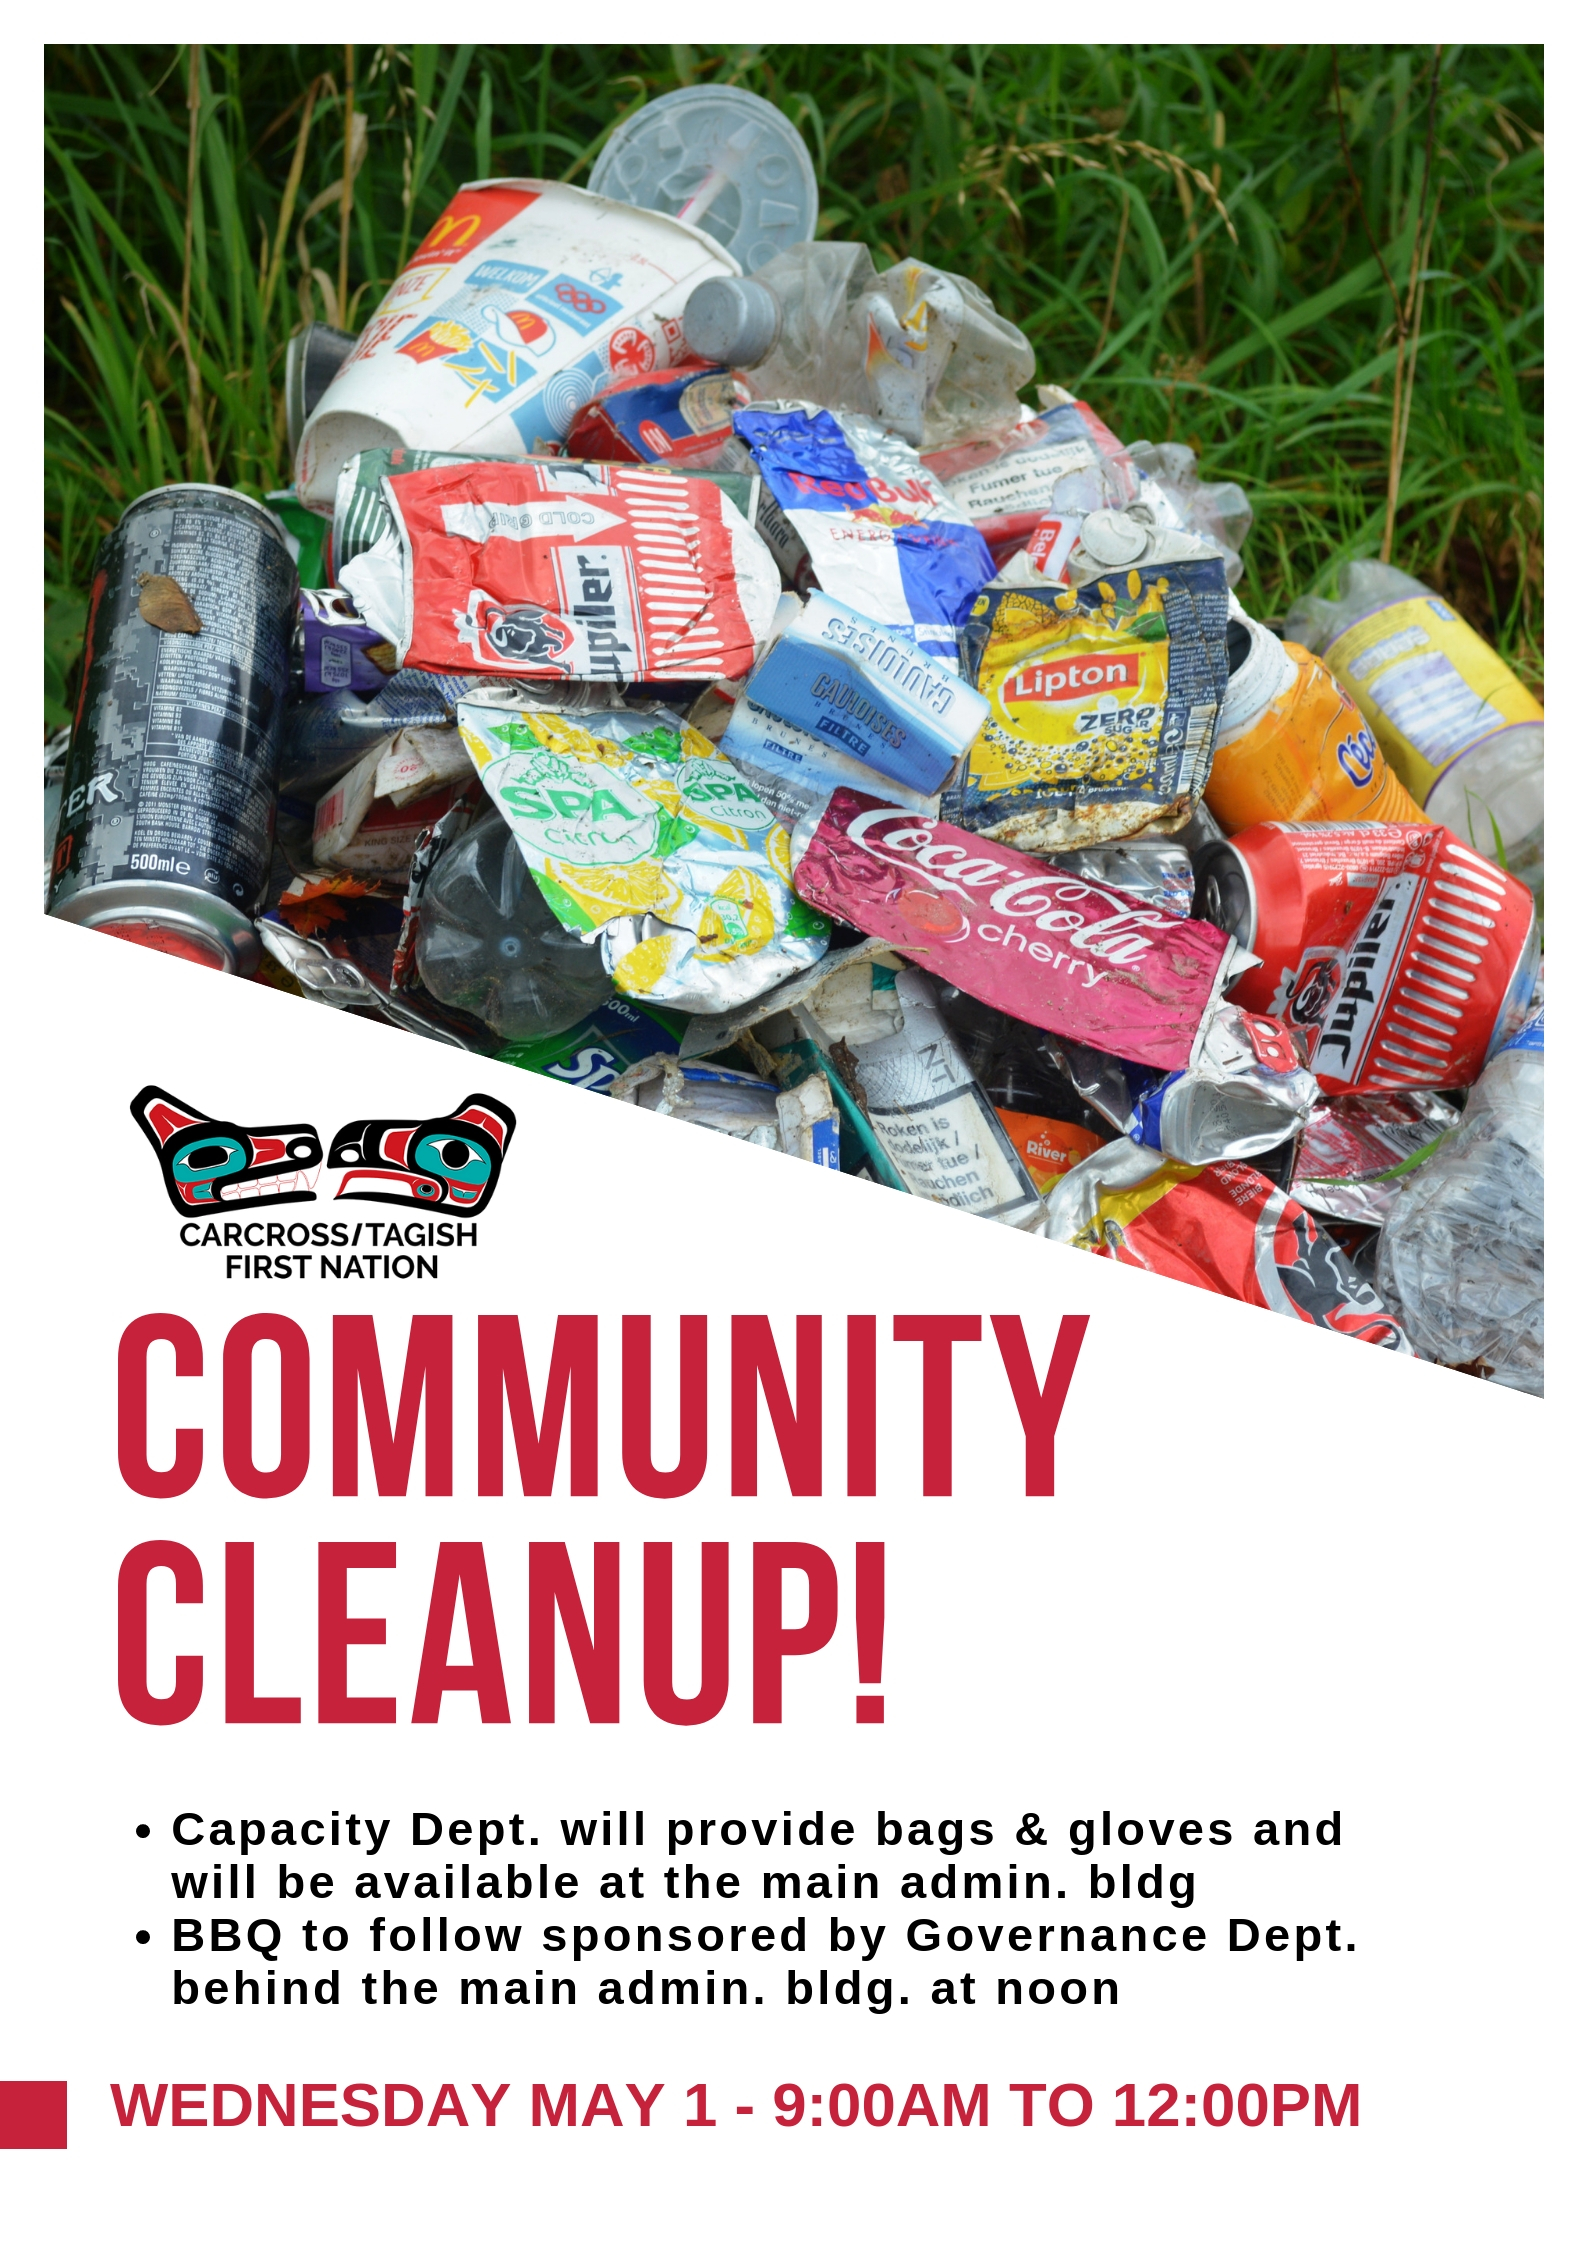 Spring Clean up Carcross/Tagish First Nation